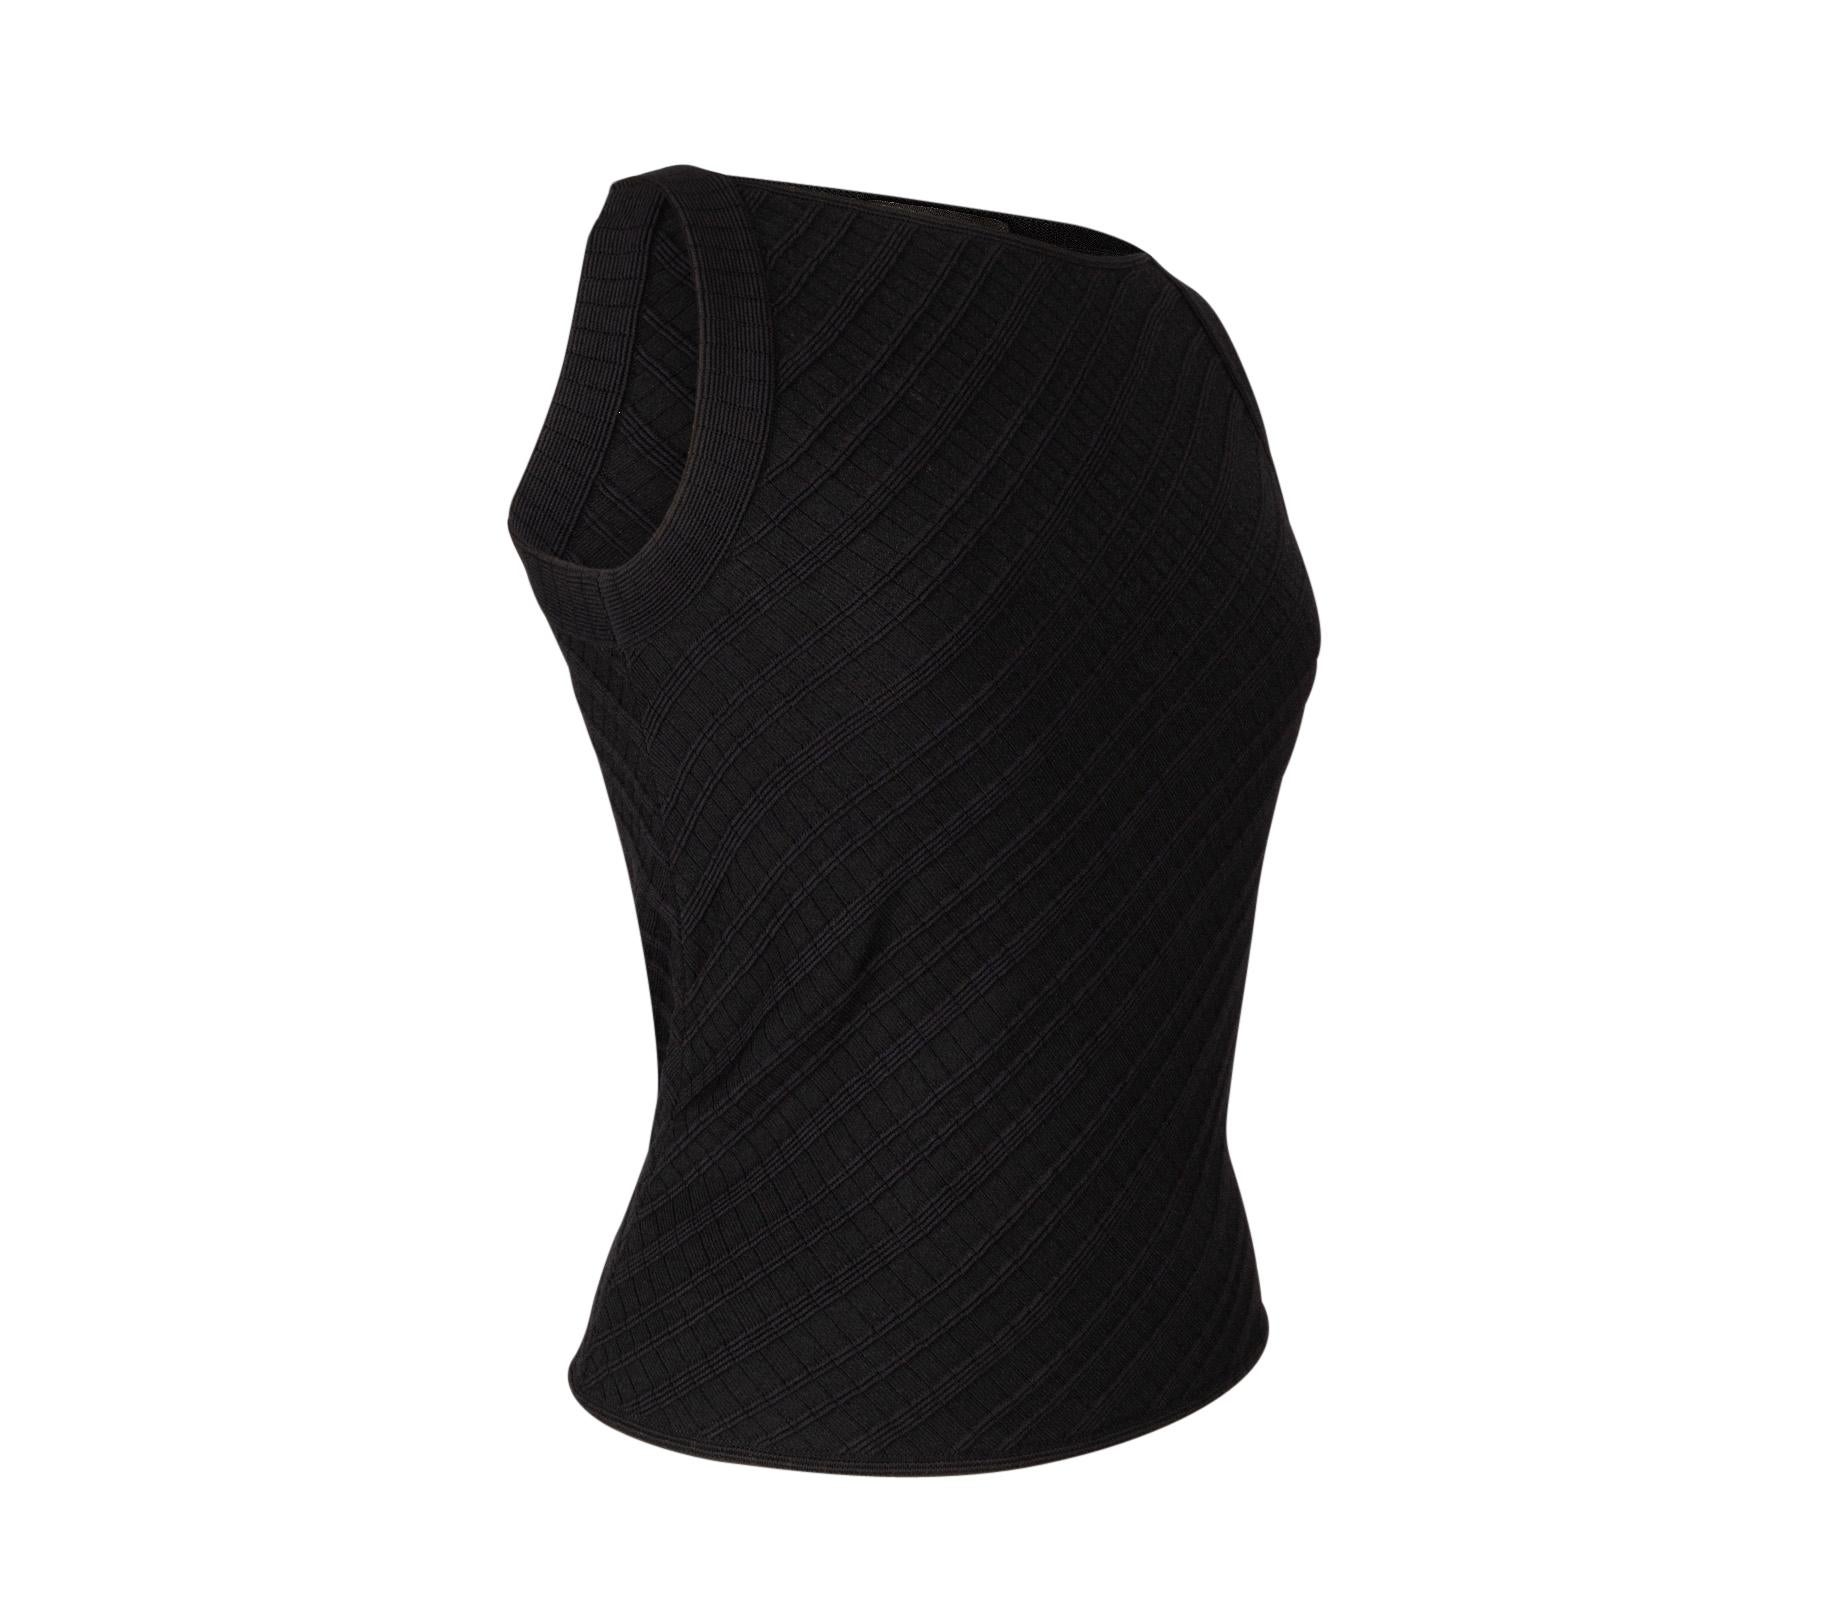 Guaranteed authentic Giorgio Armani black timeless top. 
Beautifully designed and cut knit top with richly textured fabric. 
Classic.
Fabric is rayon and polyester.
final sale

SIZE 40
USA 6

TOP MEASURES: 
LENGTH 20.25